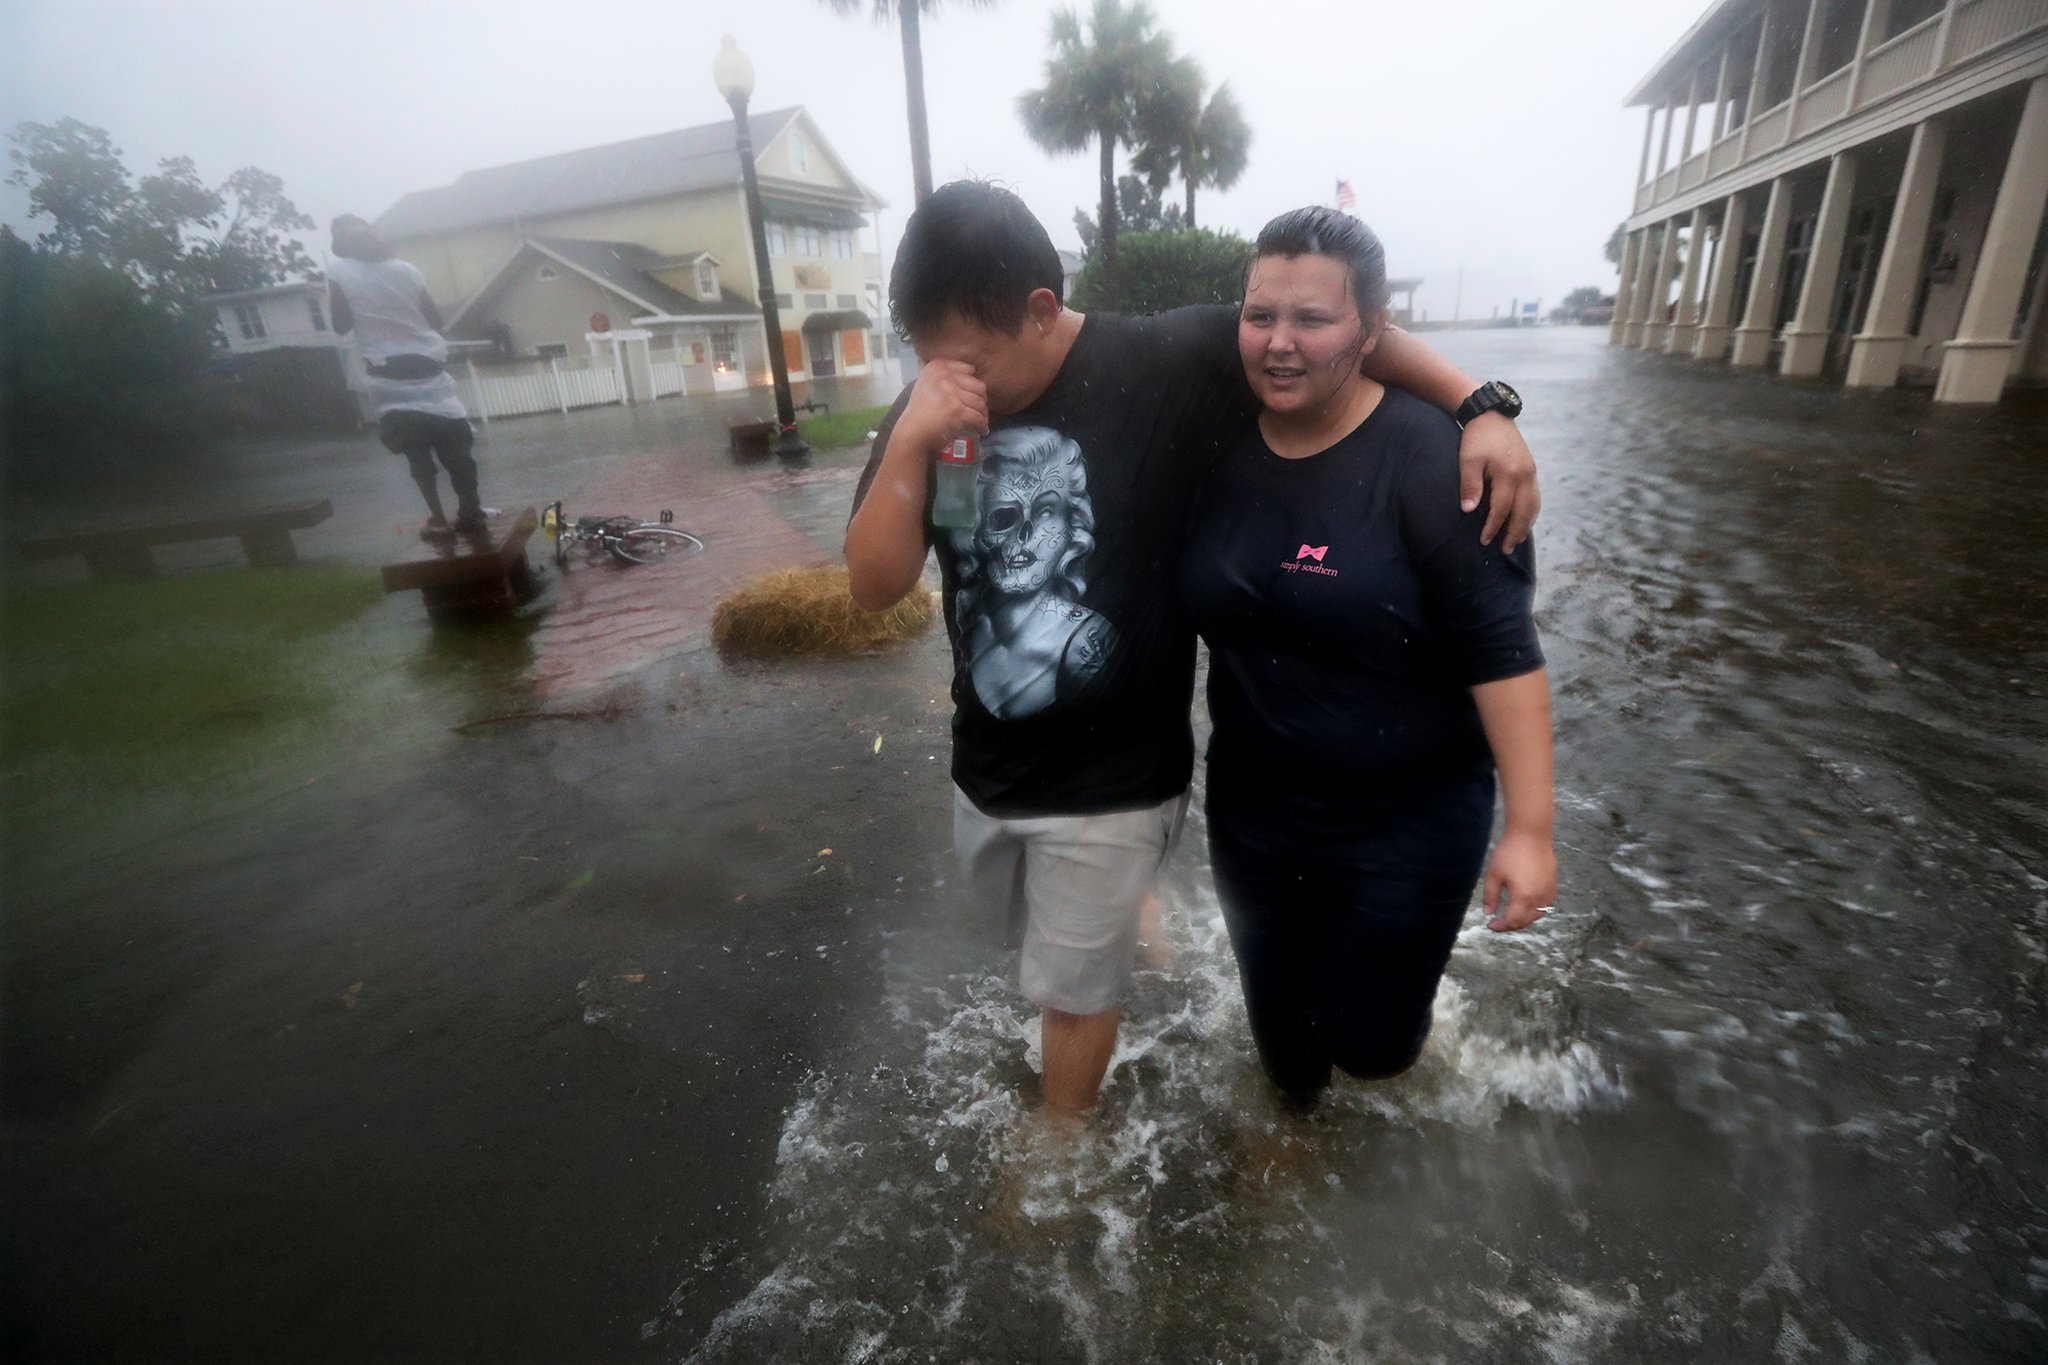 Michael and Tori Munton make their way through the flooded streets of downtown historic Saint Marys, Ga., as the storm surge from Hurricane Matthew hits on Friday, Oct. 7, 2016. Curtis Compton /ccompton@ajc.com